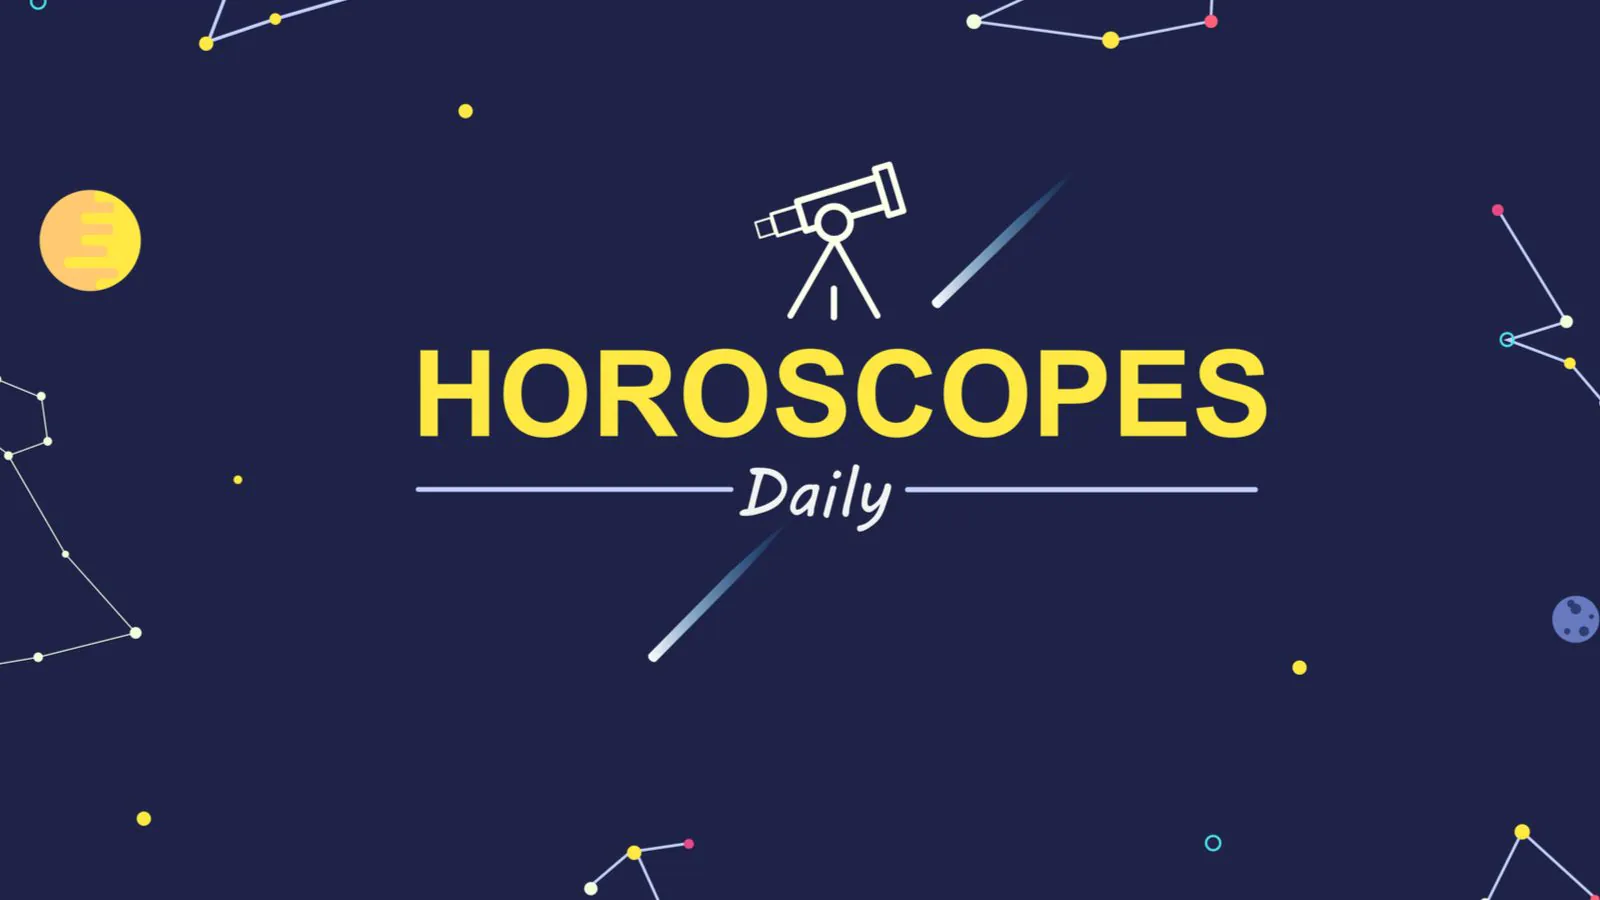 Check Out Daily Astrological Prediction for Aries, Taurus, Libra, Sagittarius And Other Zodiac Signs for Saturday